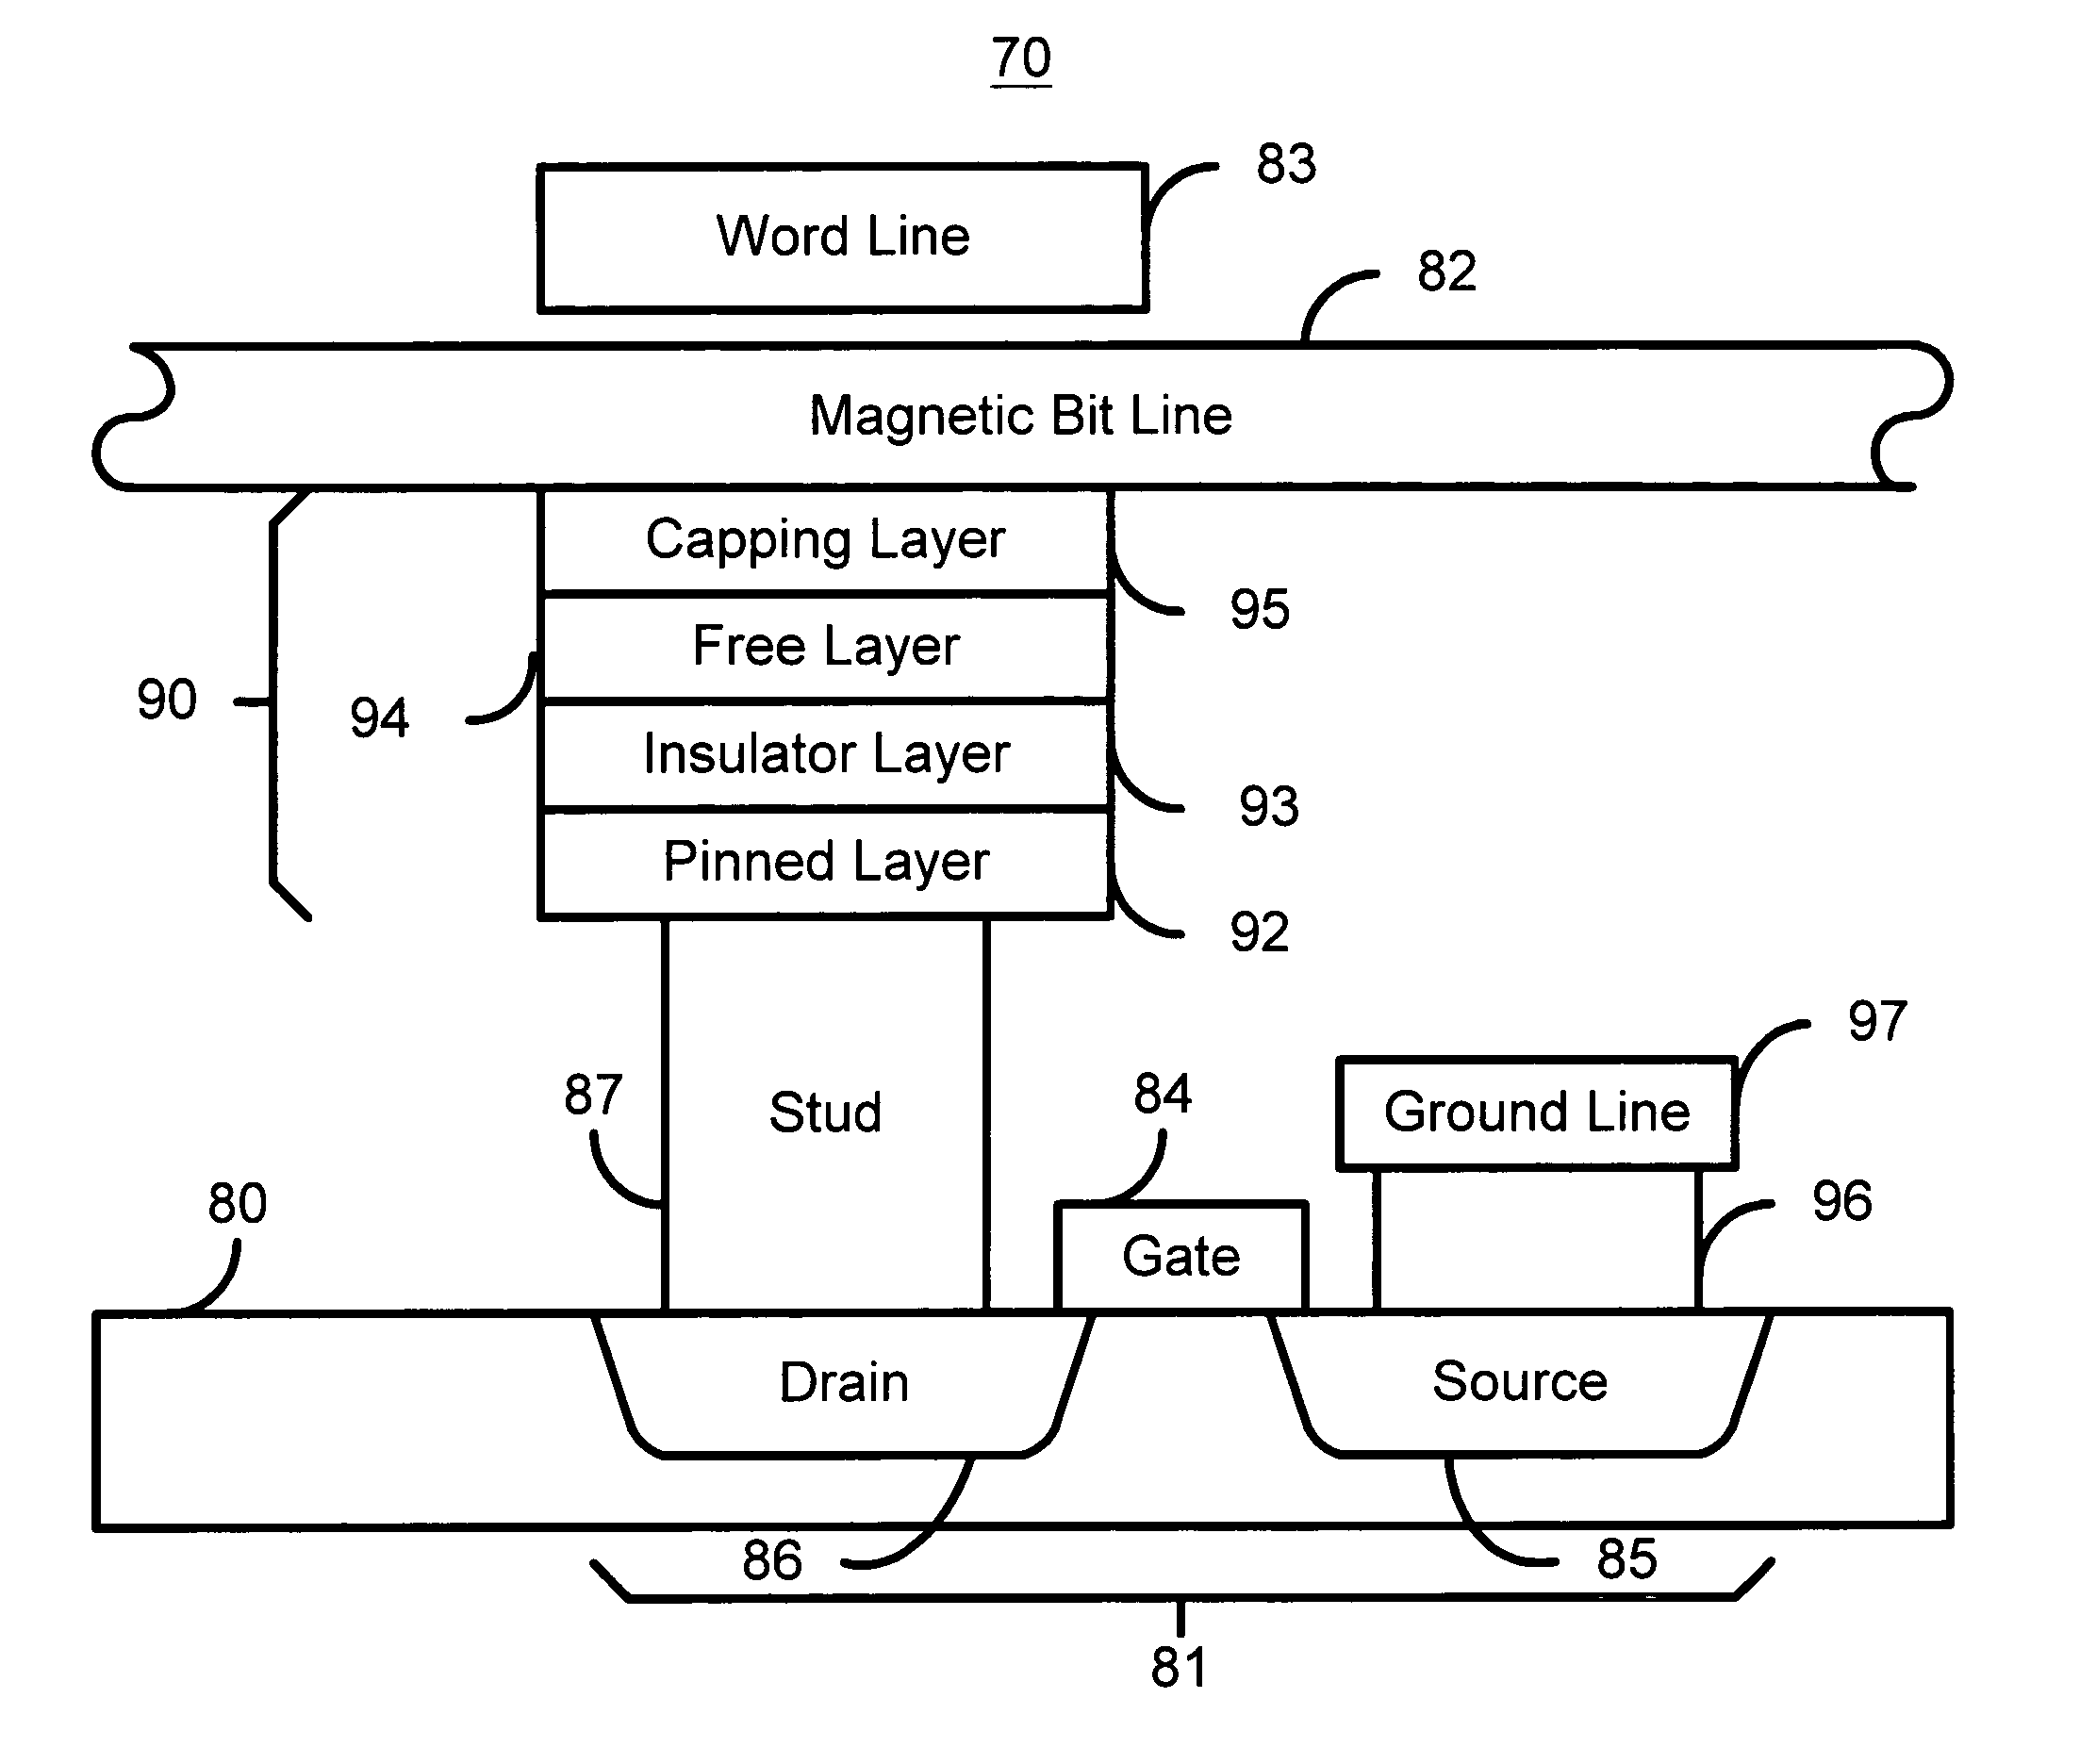 Magnetic tunneling junction cell array with shared reference layer for MRAM applications